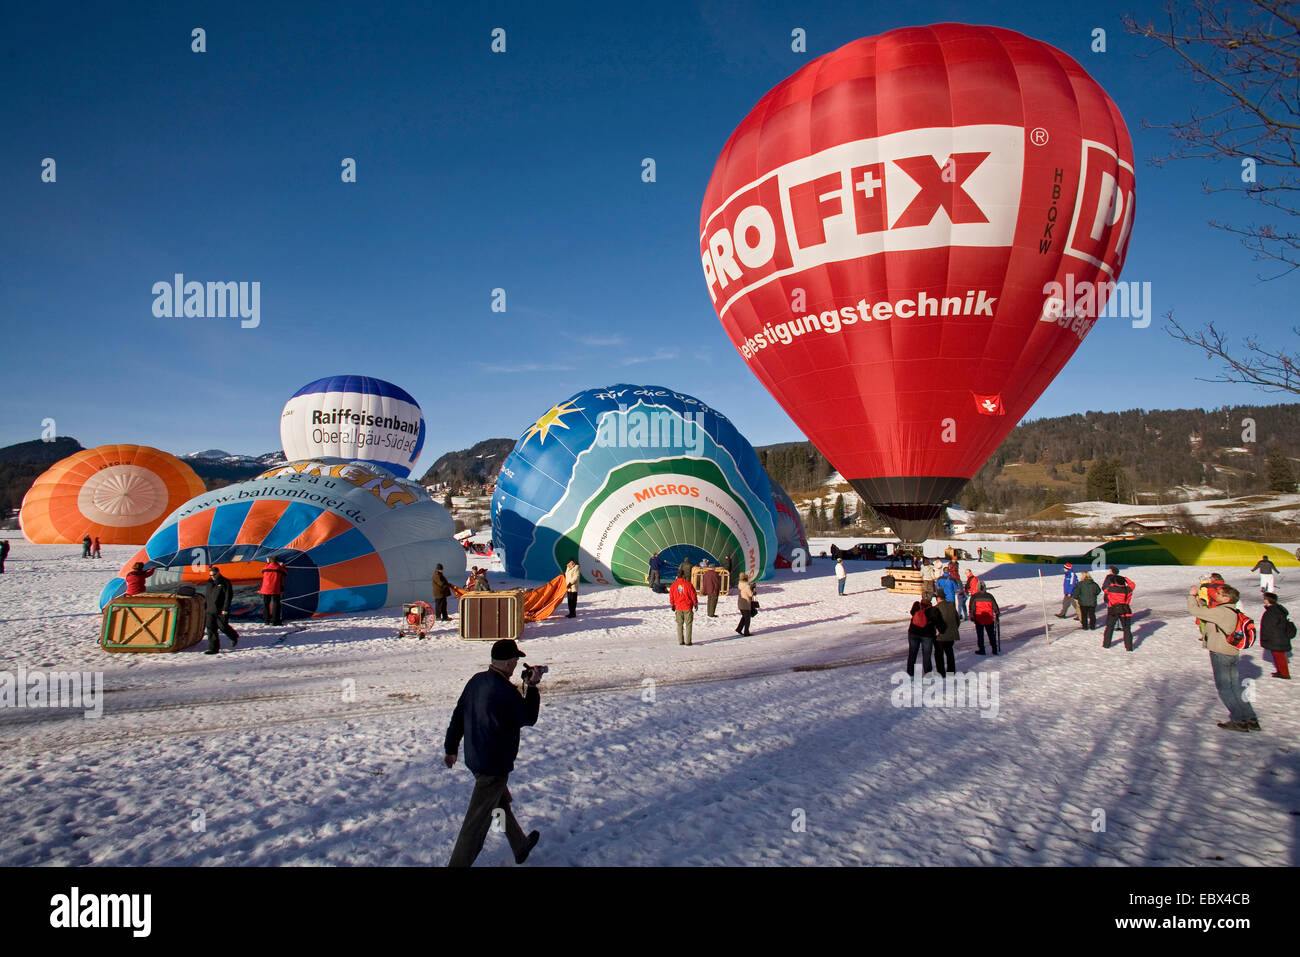 hot-air balloon festival on a snow field with several balloons being prepared for the start and a lot of spectators, Germany, Bavaria, Allgaeu, Oberstdorf Stock Photo